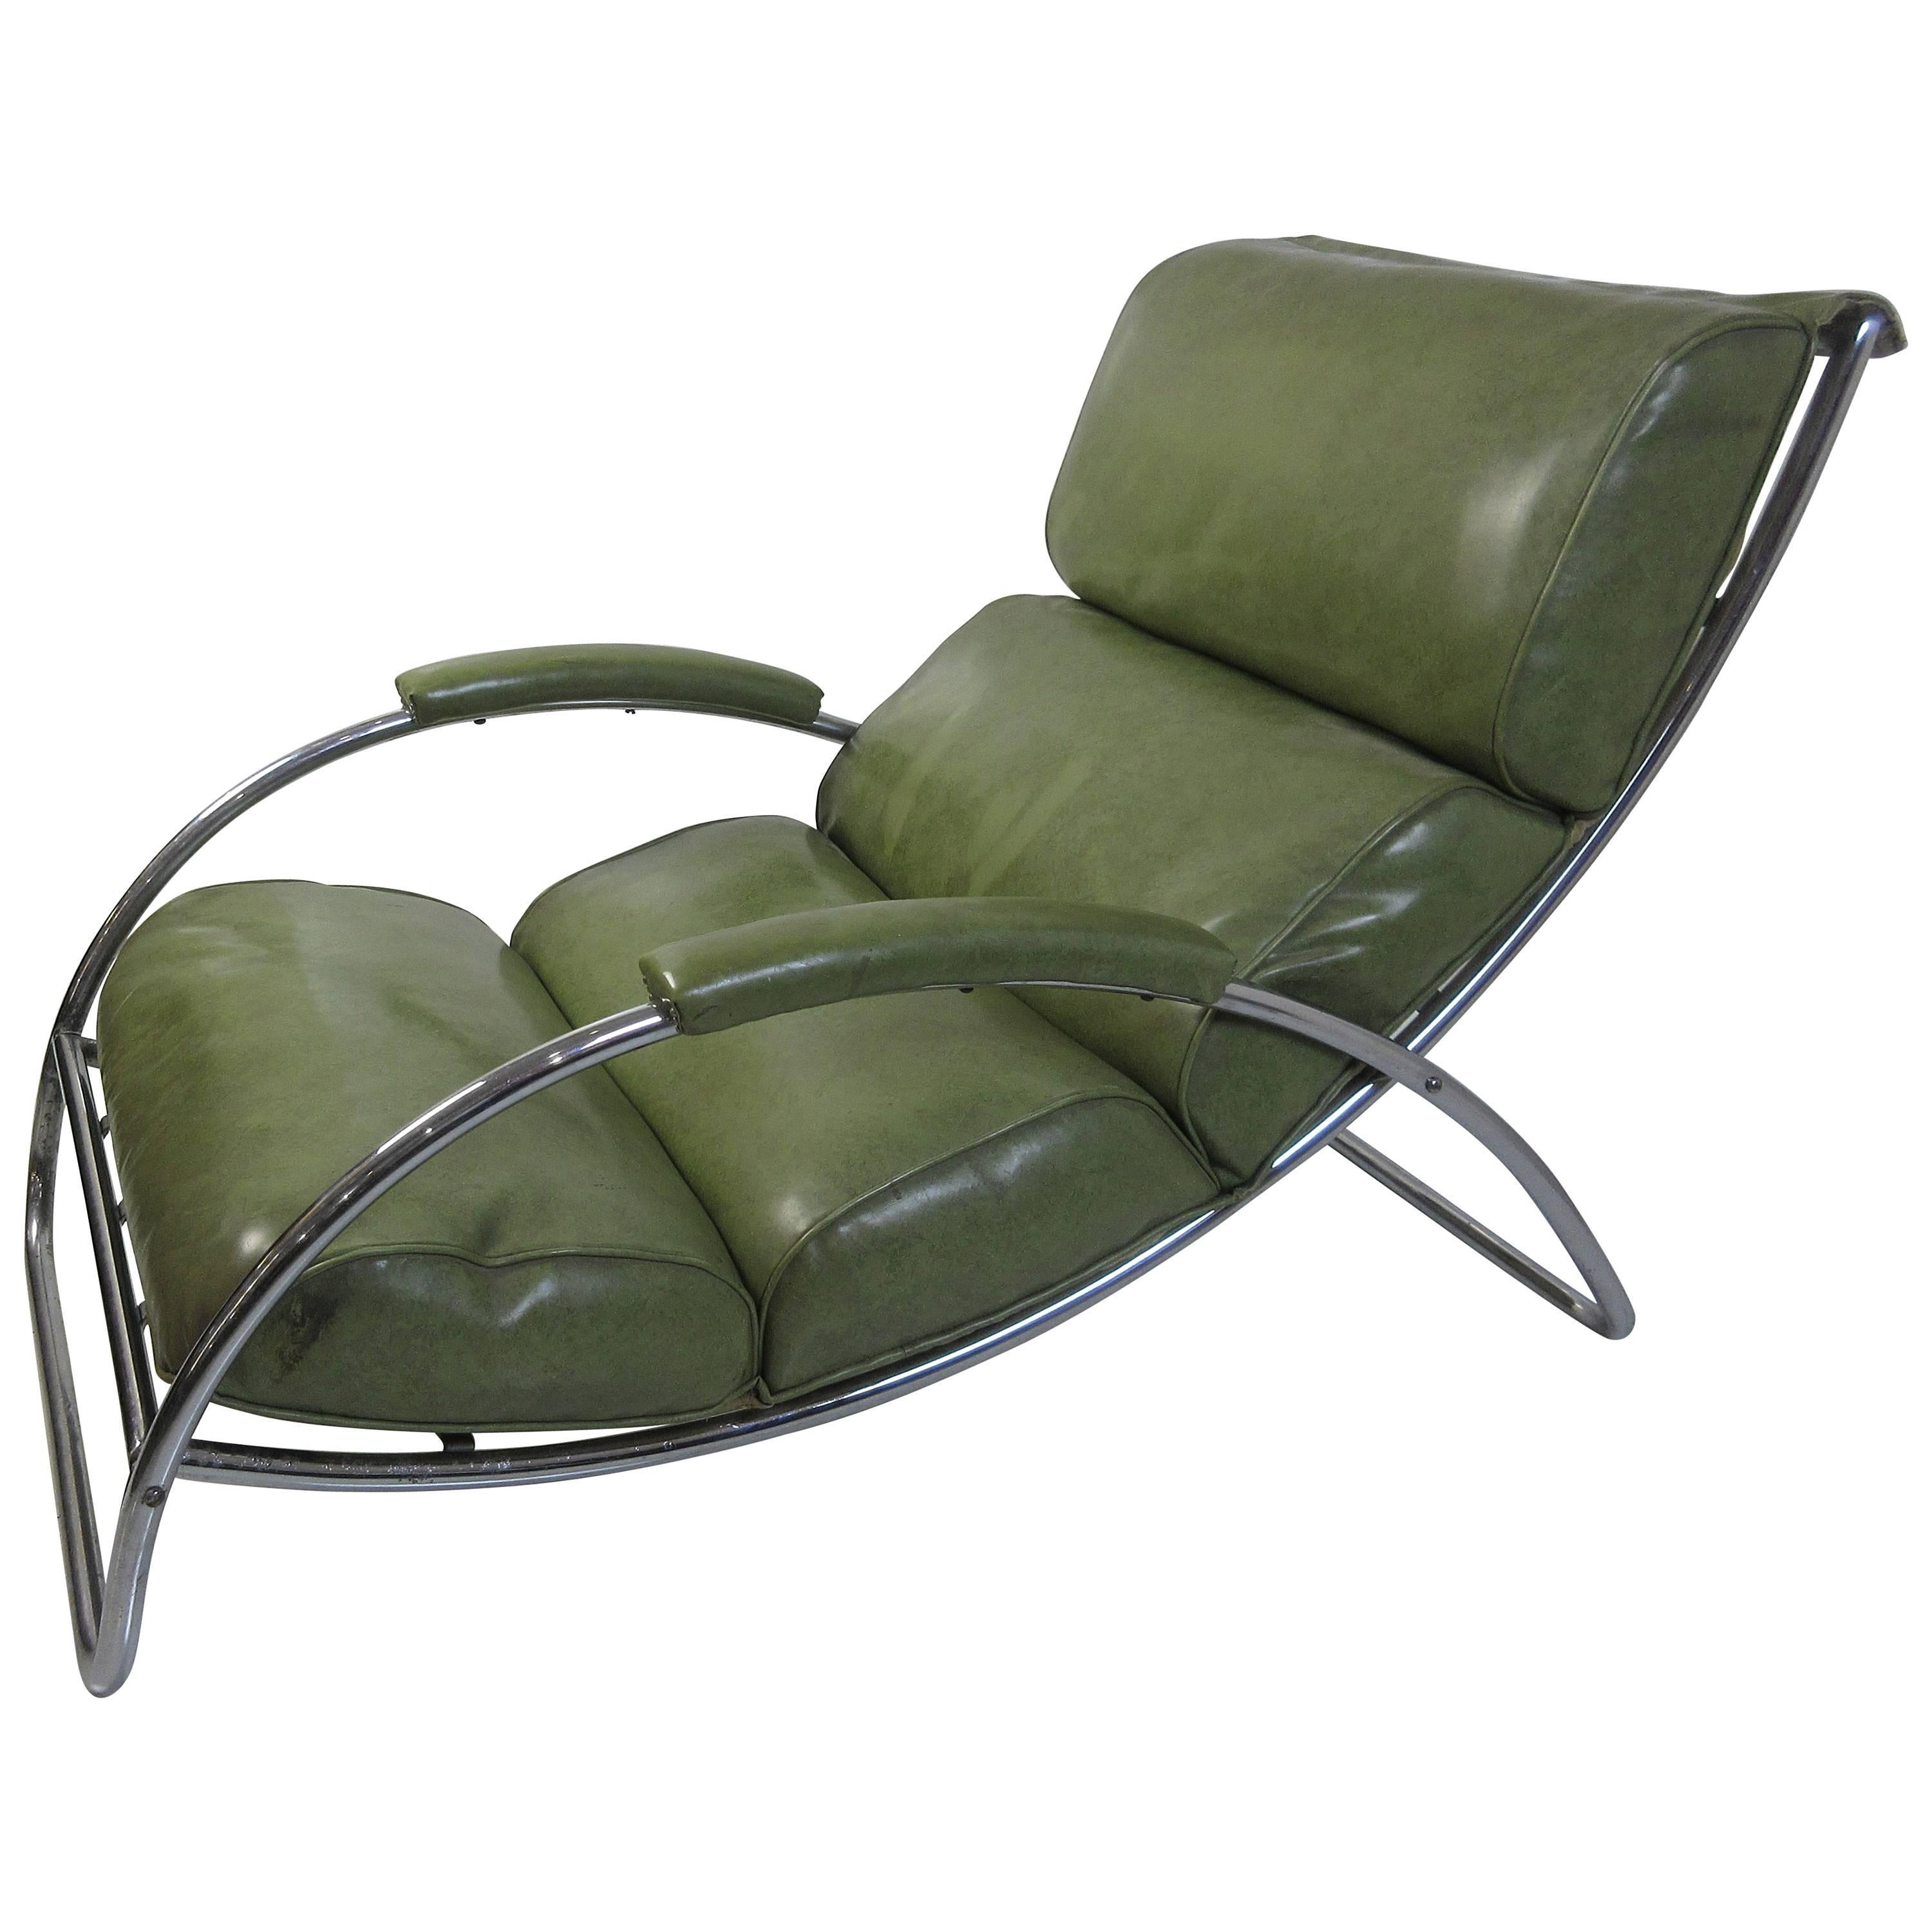 Gilbert Rohde for Troy Sunshade 1934 Lounge Chair